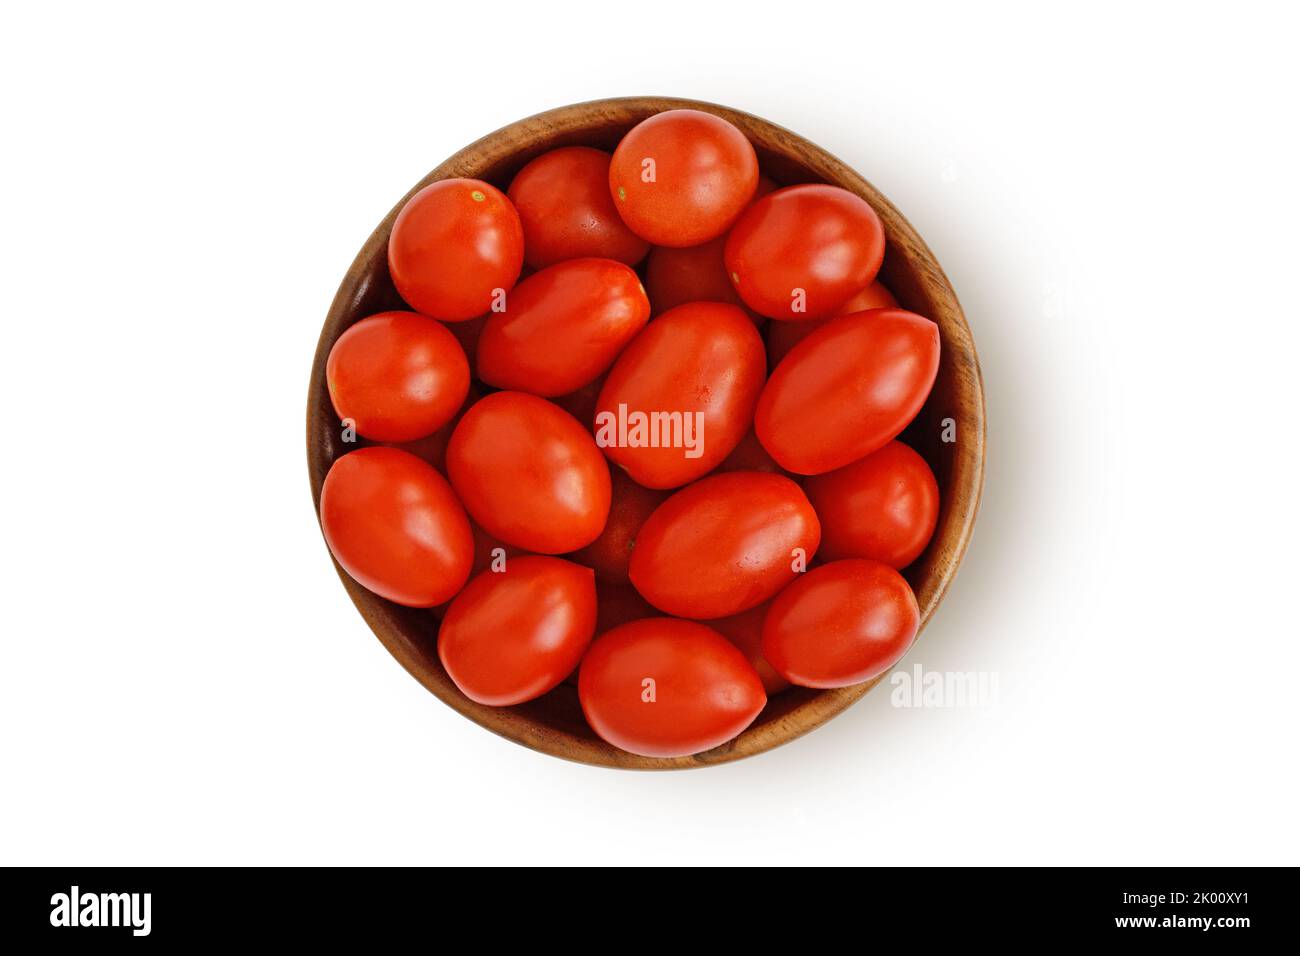 Datterini tomatoes in wooden bowl on white background Stock Photo